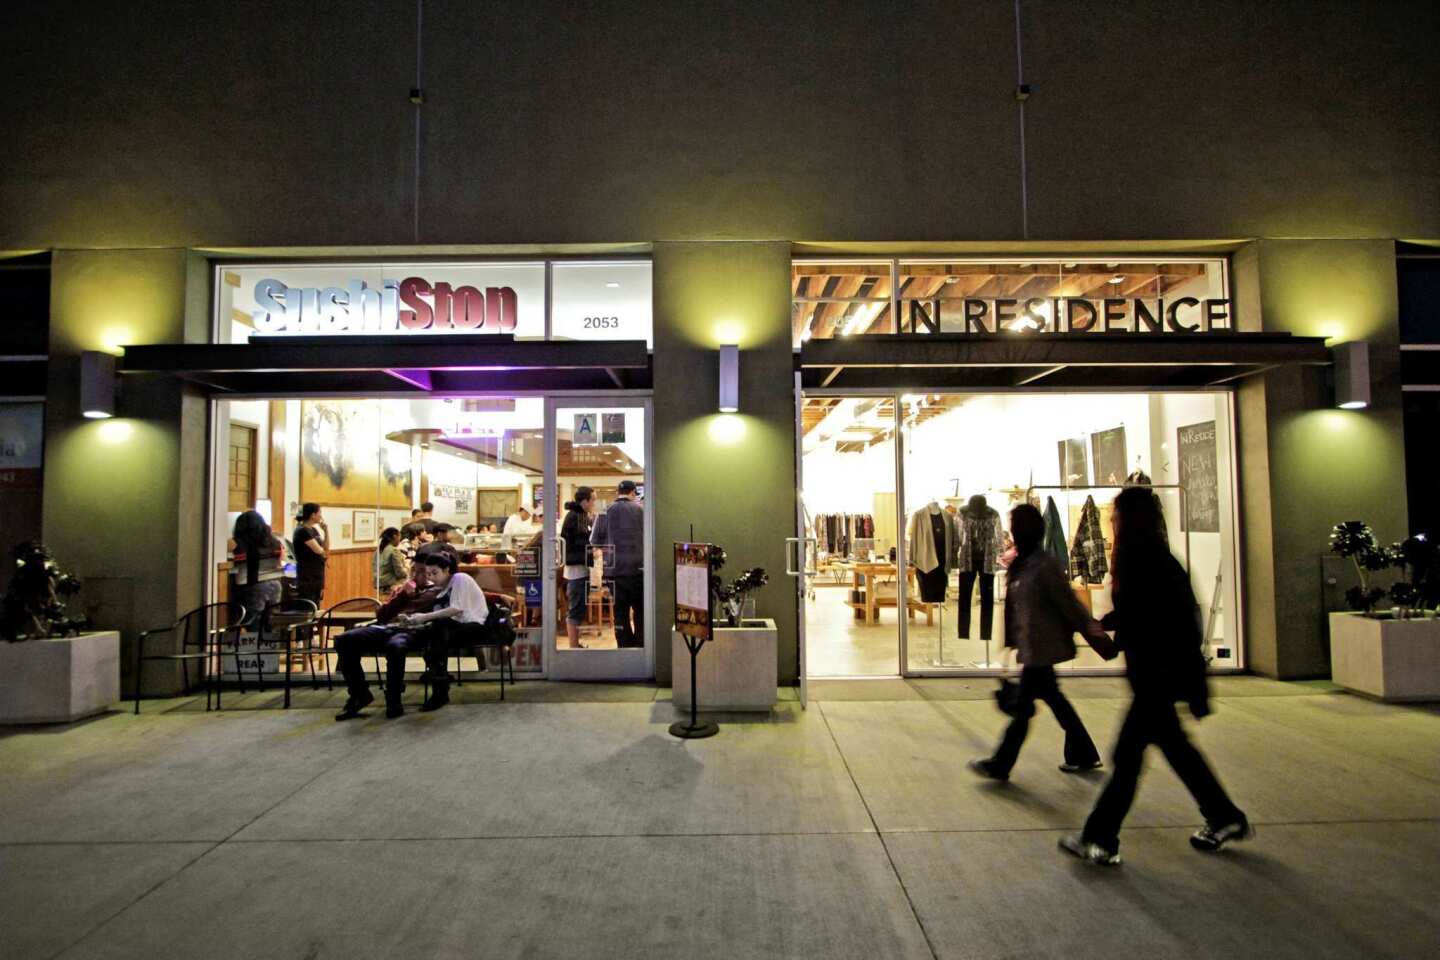 Sushi Stop restaurant and In Residence clothing store on Sawtelle.